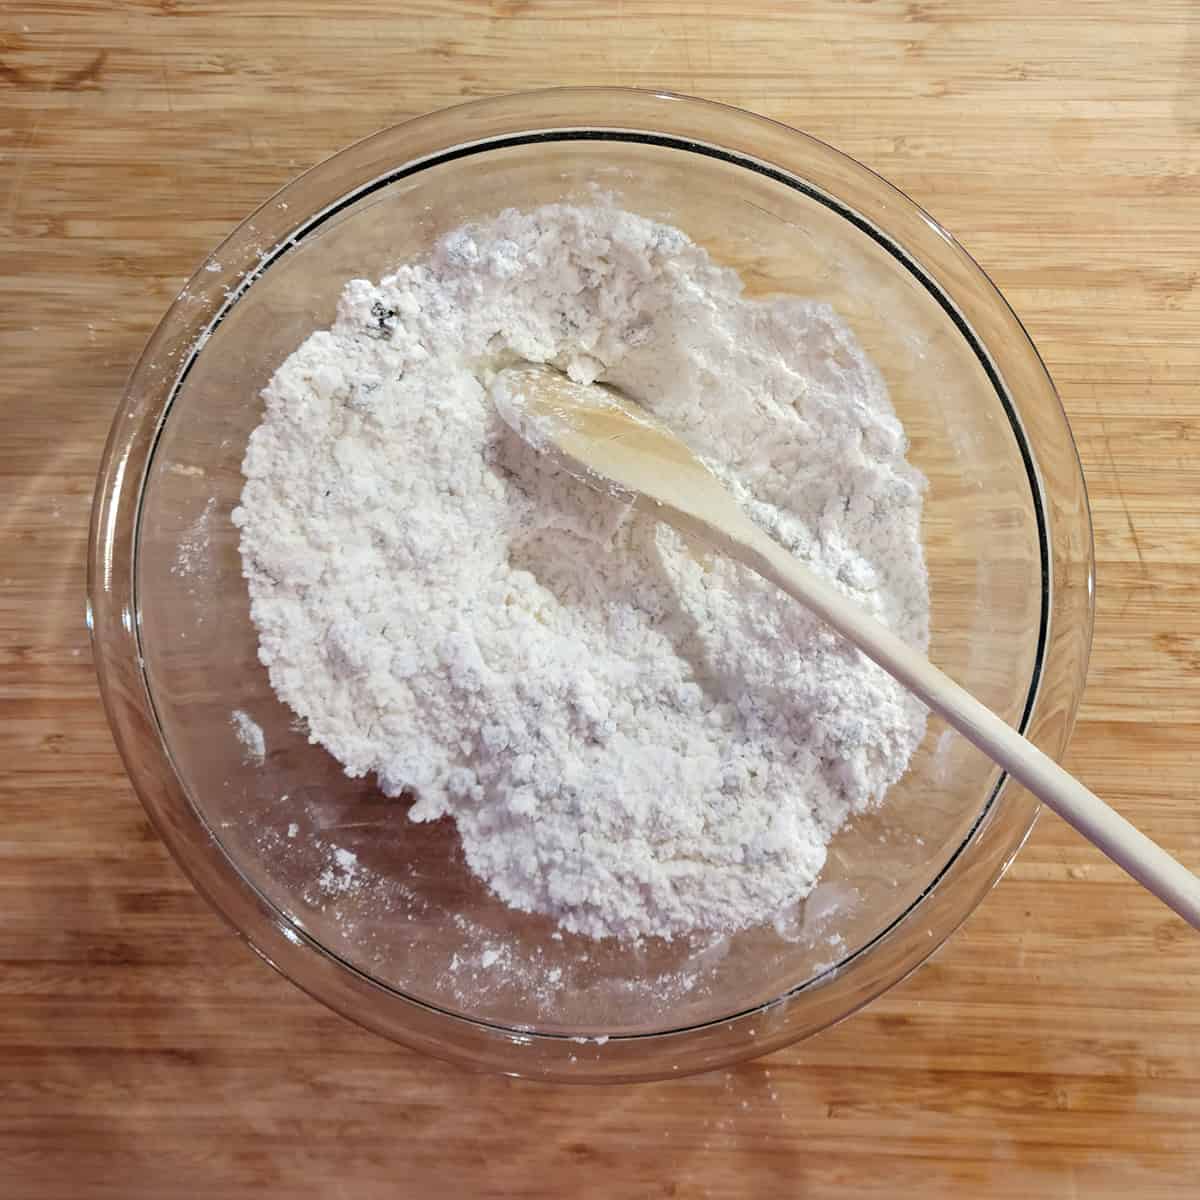 Currants added to the flour-butter mixture.